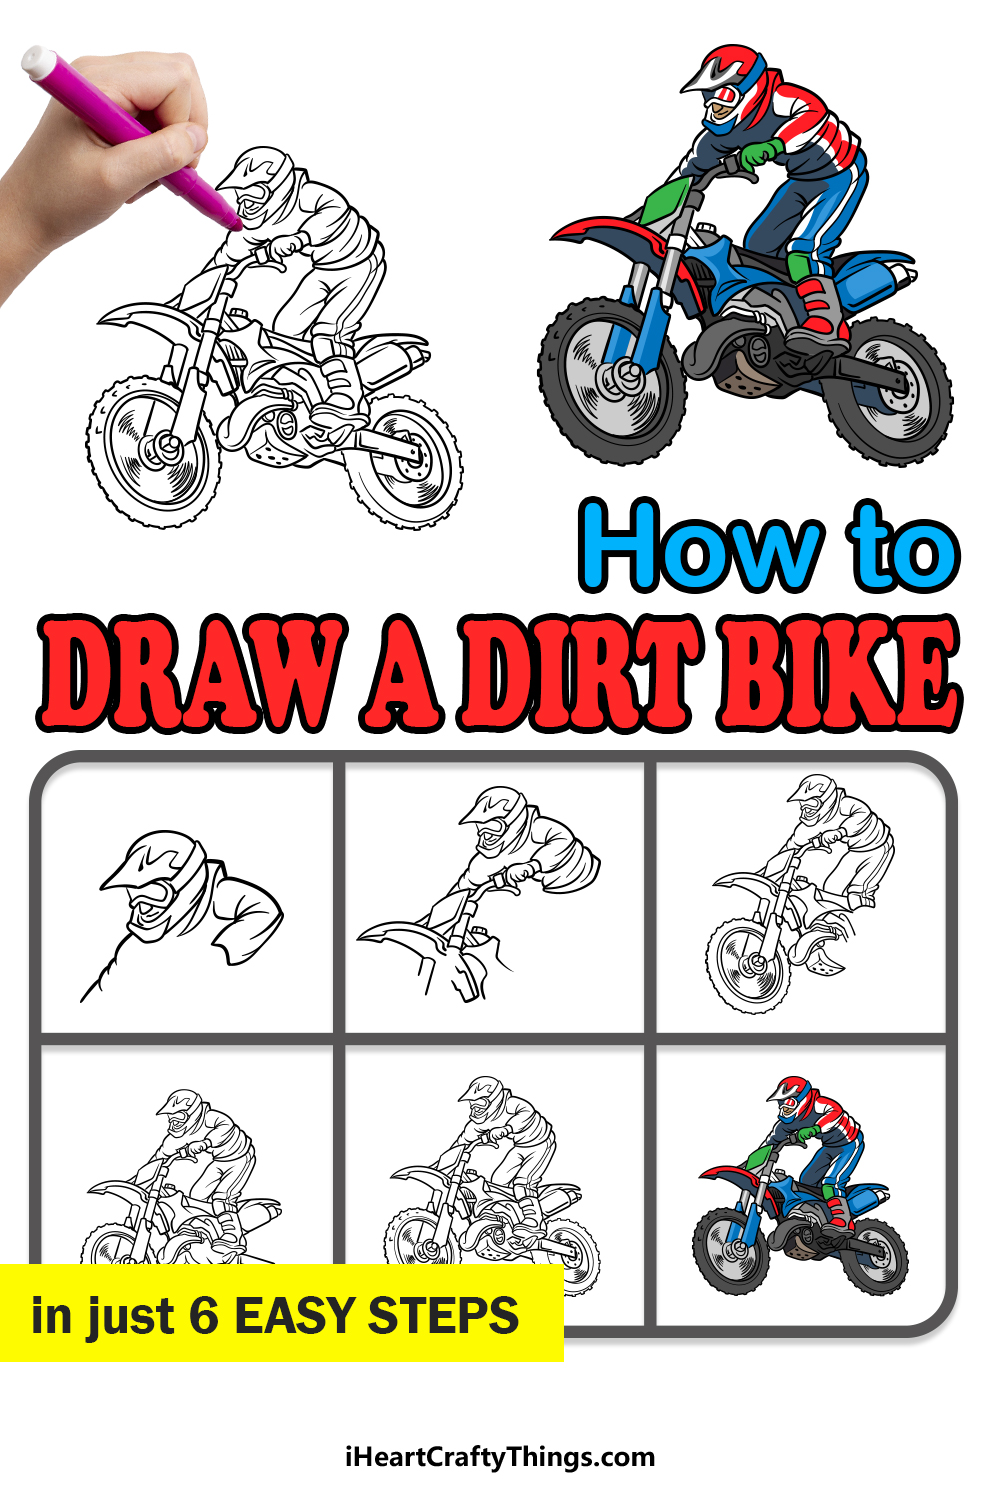 how to draw a dirt bike in 6 easy steps